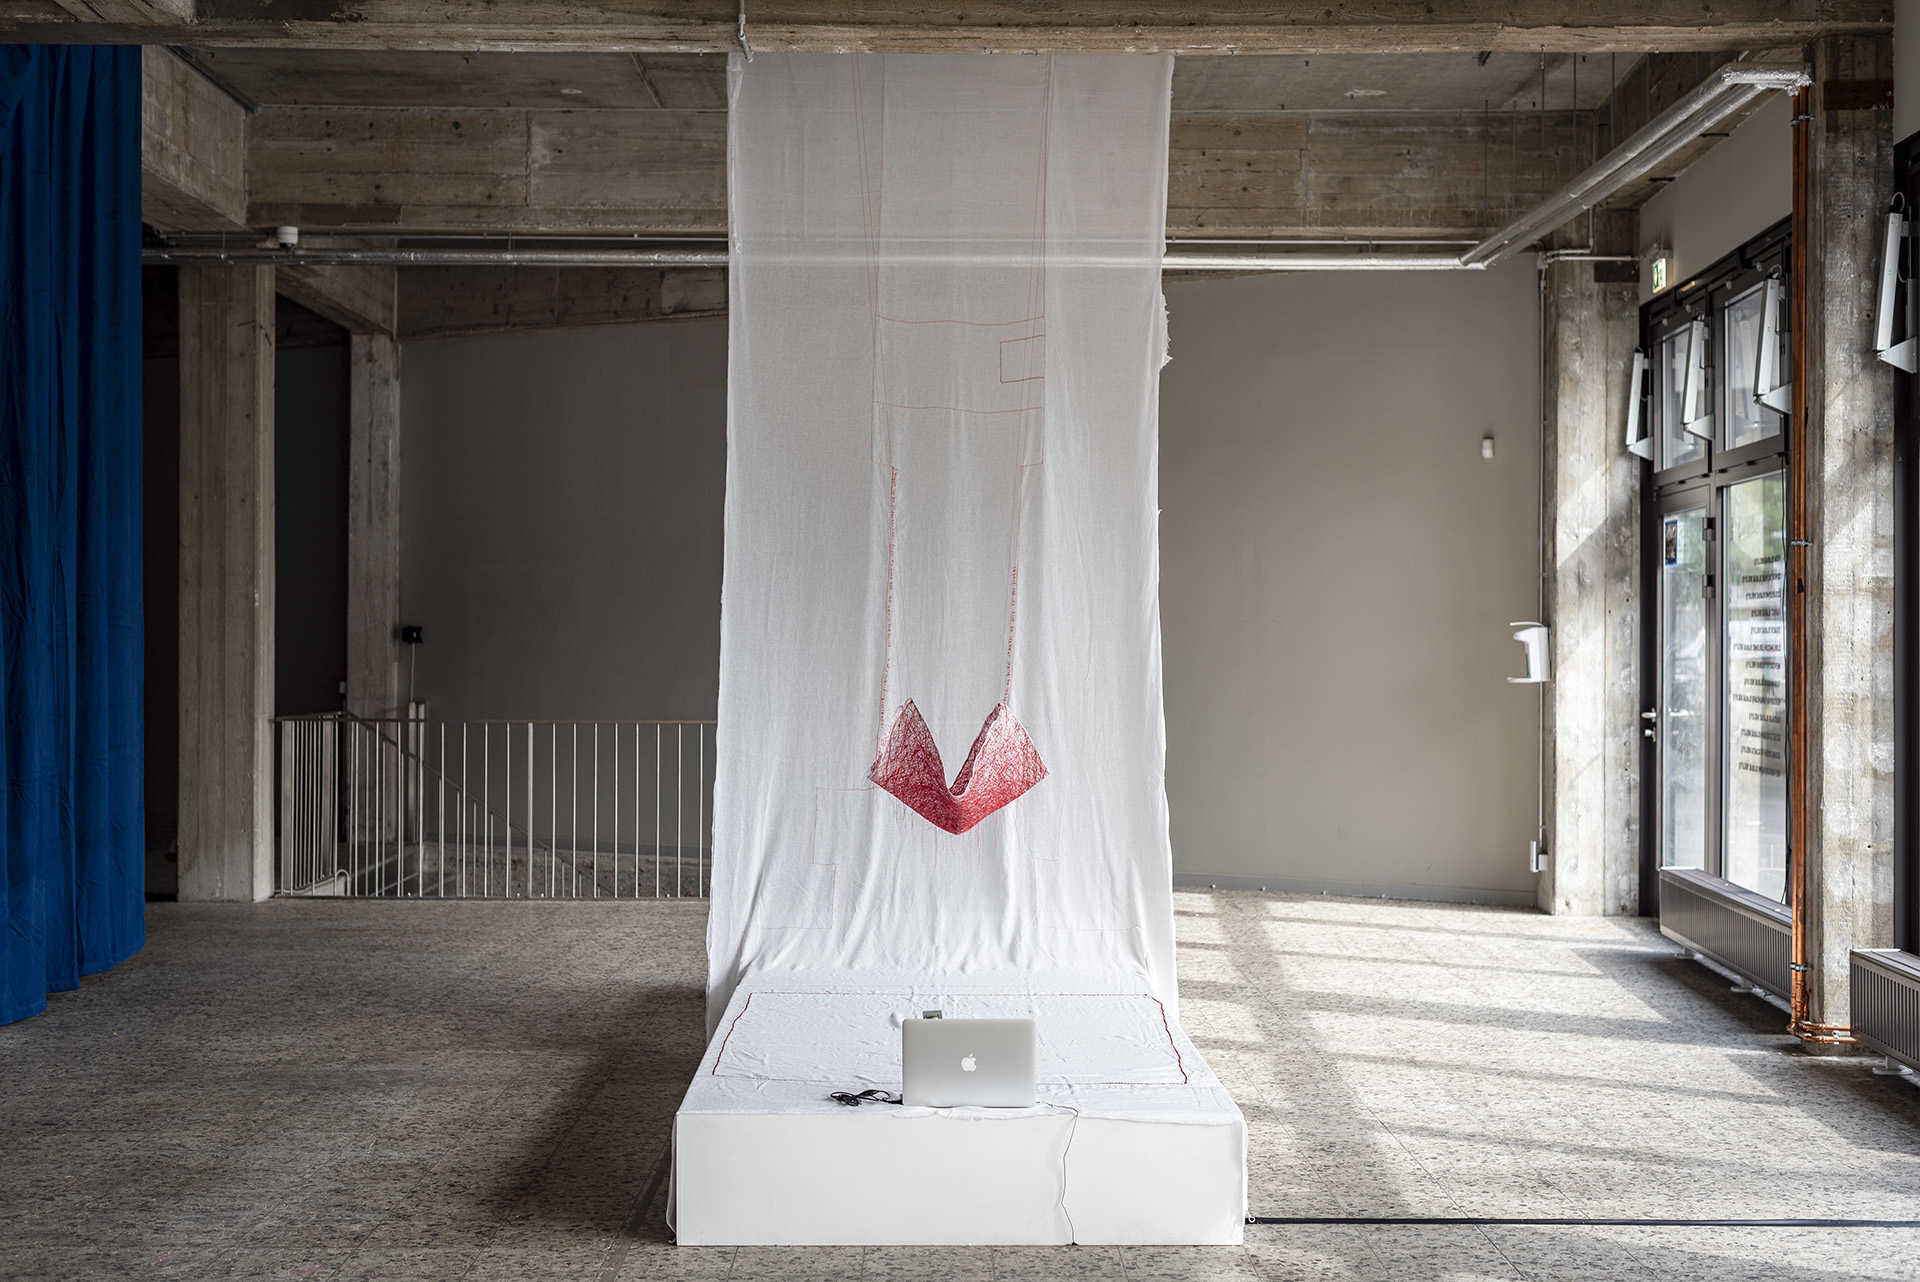 "I snuggle into the tomb bed from my wedding chamber my hair is the quilt the spirit-guiding streamer" ~ performance installation by Dakota Guo ` 2022